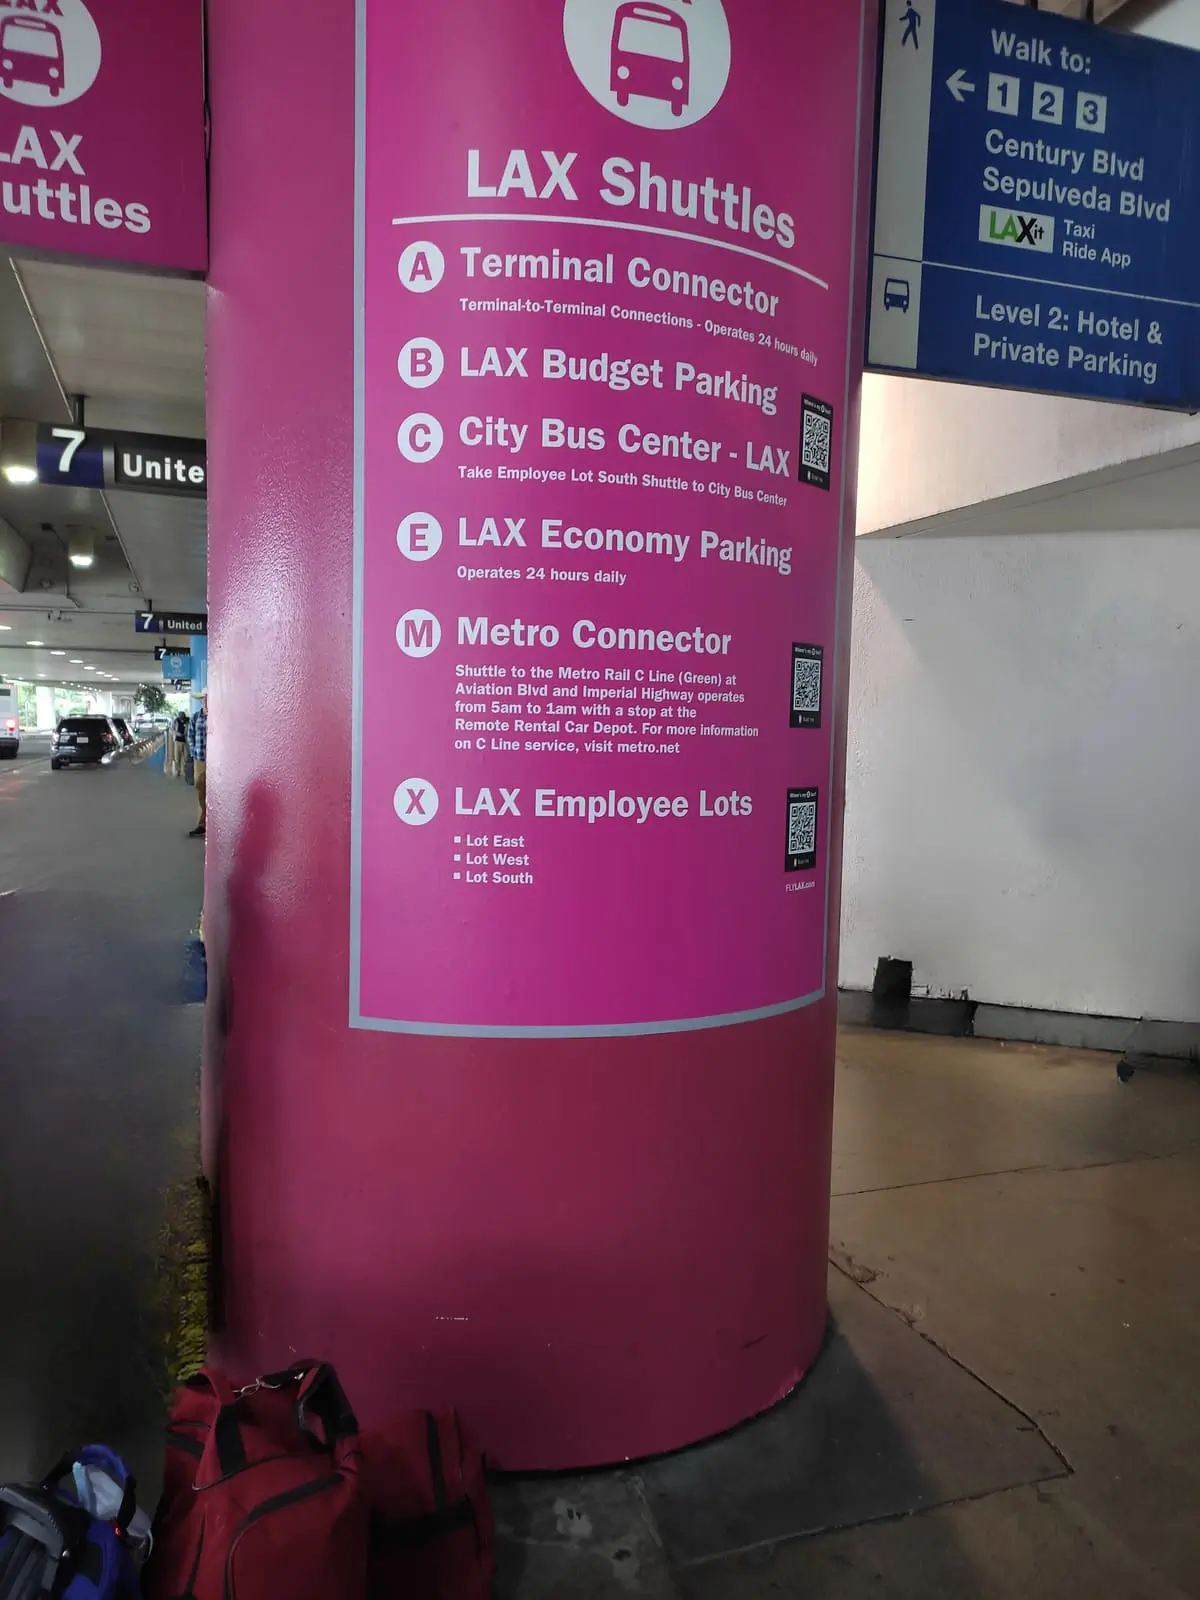 Large pink column in front of terminal 7 at LAX to mark the shuttle stop. Large white writing shows where the different shuttles go.